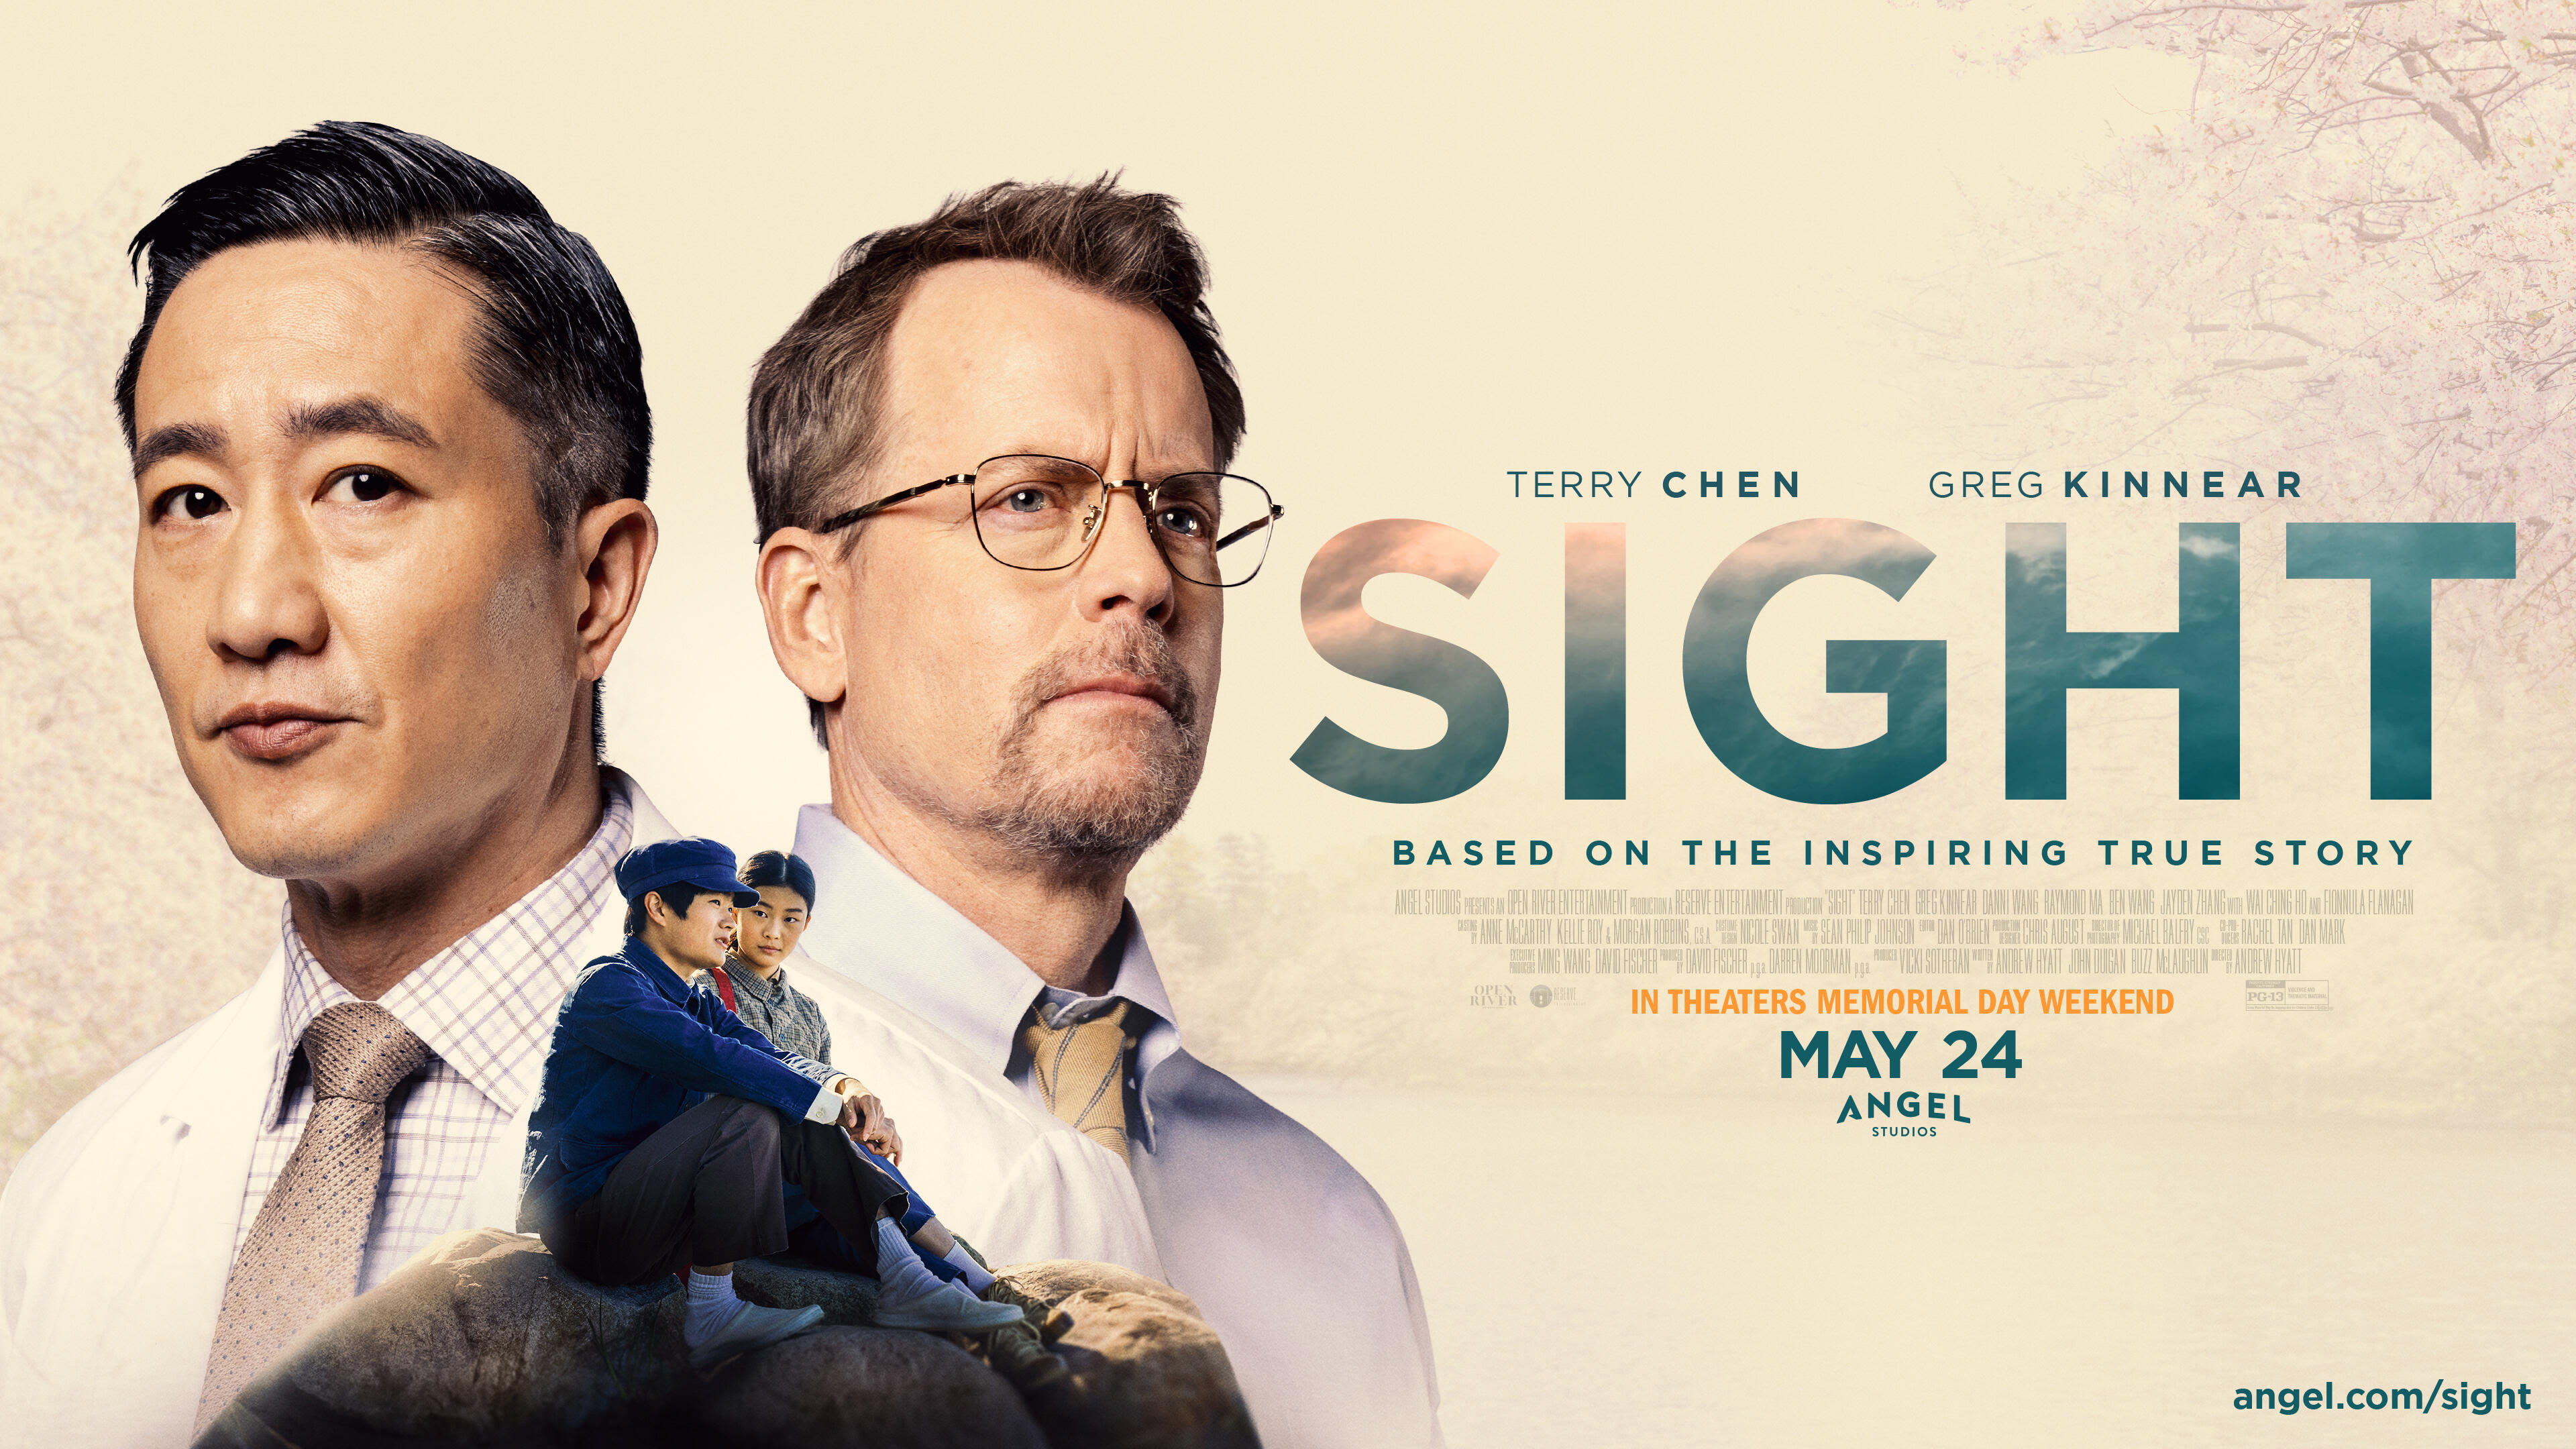 Dr Ming Wang and His Remarkable Life is the Subject of the New Movie Sight | iHeart